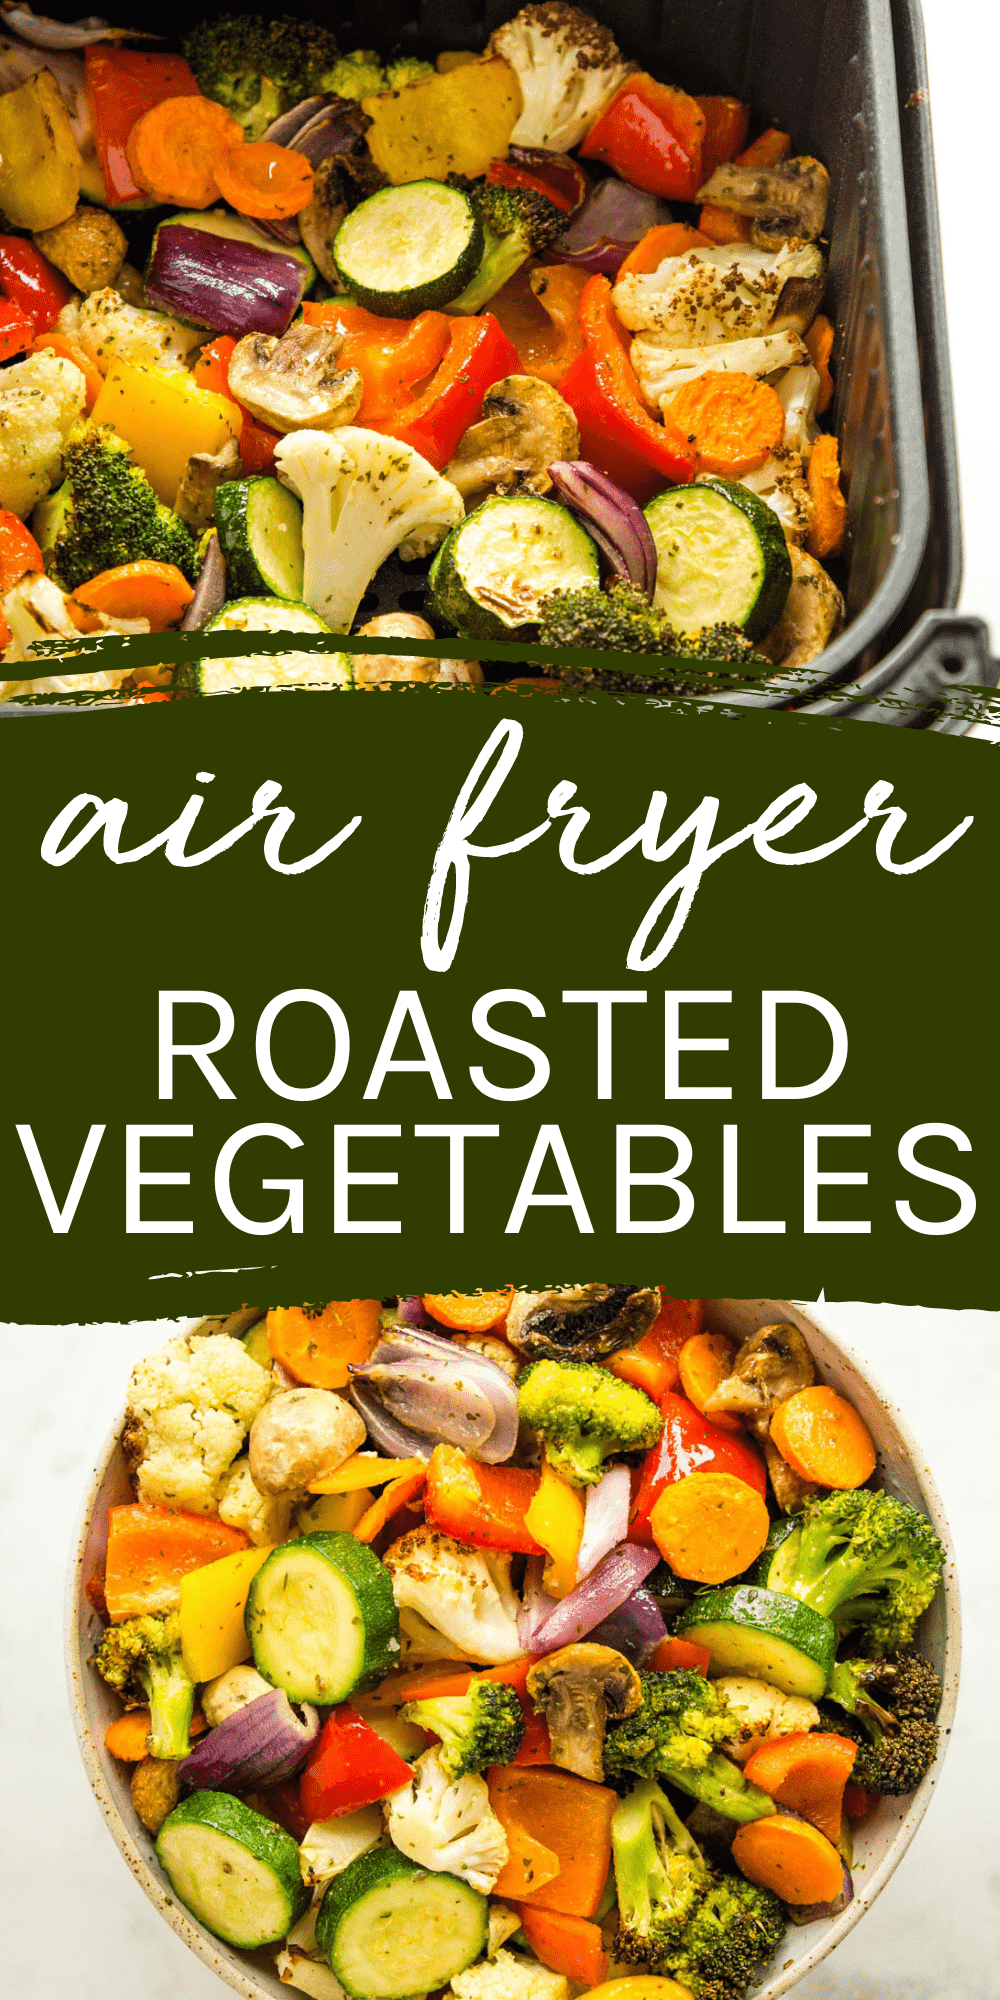 These Air Fryer Roasted Vegetables are perfectly cooked - tender and juicy with the best oven-roasted flavour. Ready in under 15 minutes! Recipe from thebusybaker.ca! #airfryer #roastedvegetables #veggies #vegetarian #sidedish #recipe #easyrecipe #easysidedish #healthy #plantbased #vegan #health #eattherainbow via @busybakerblog